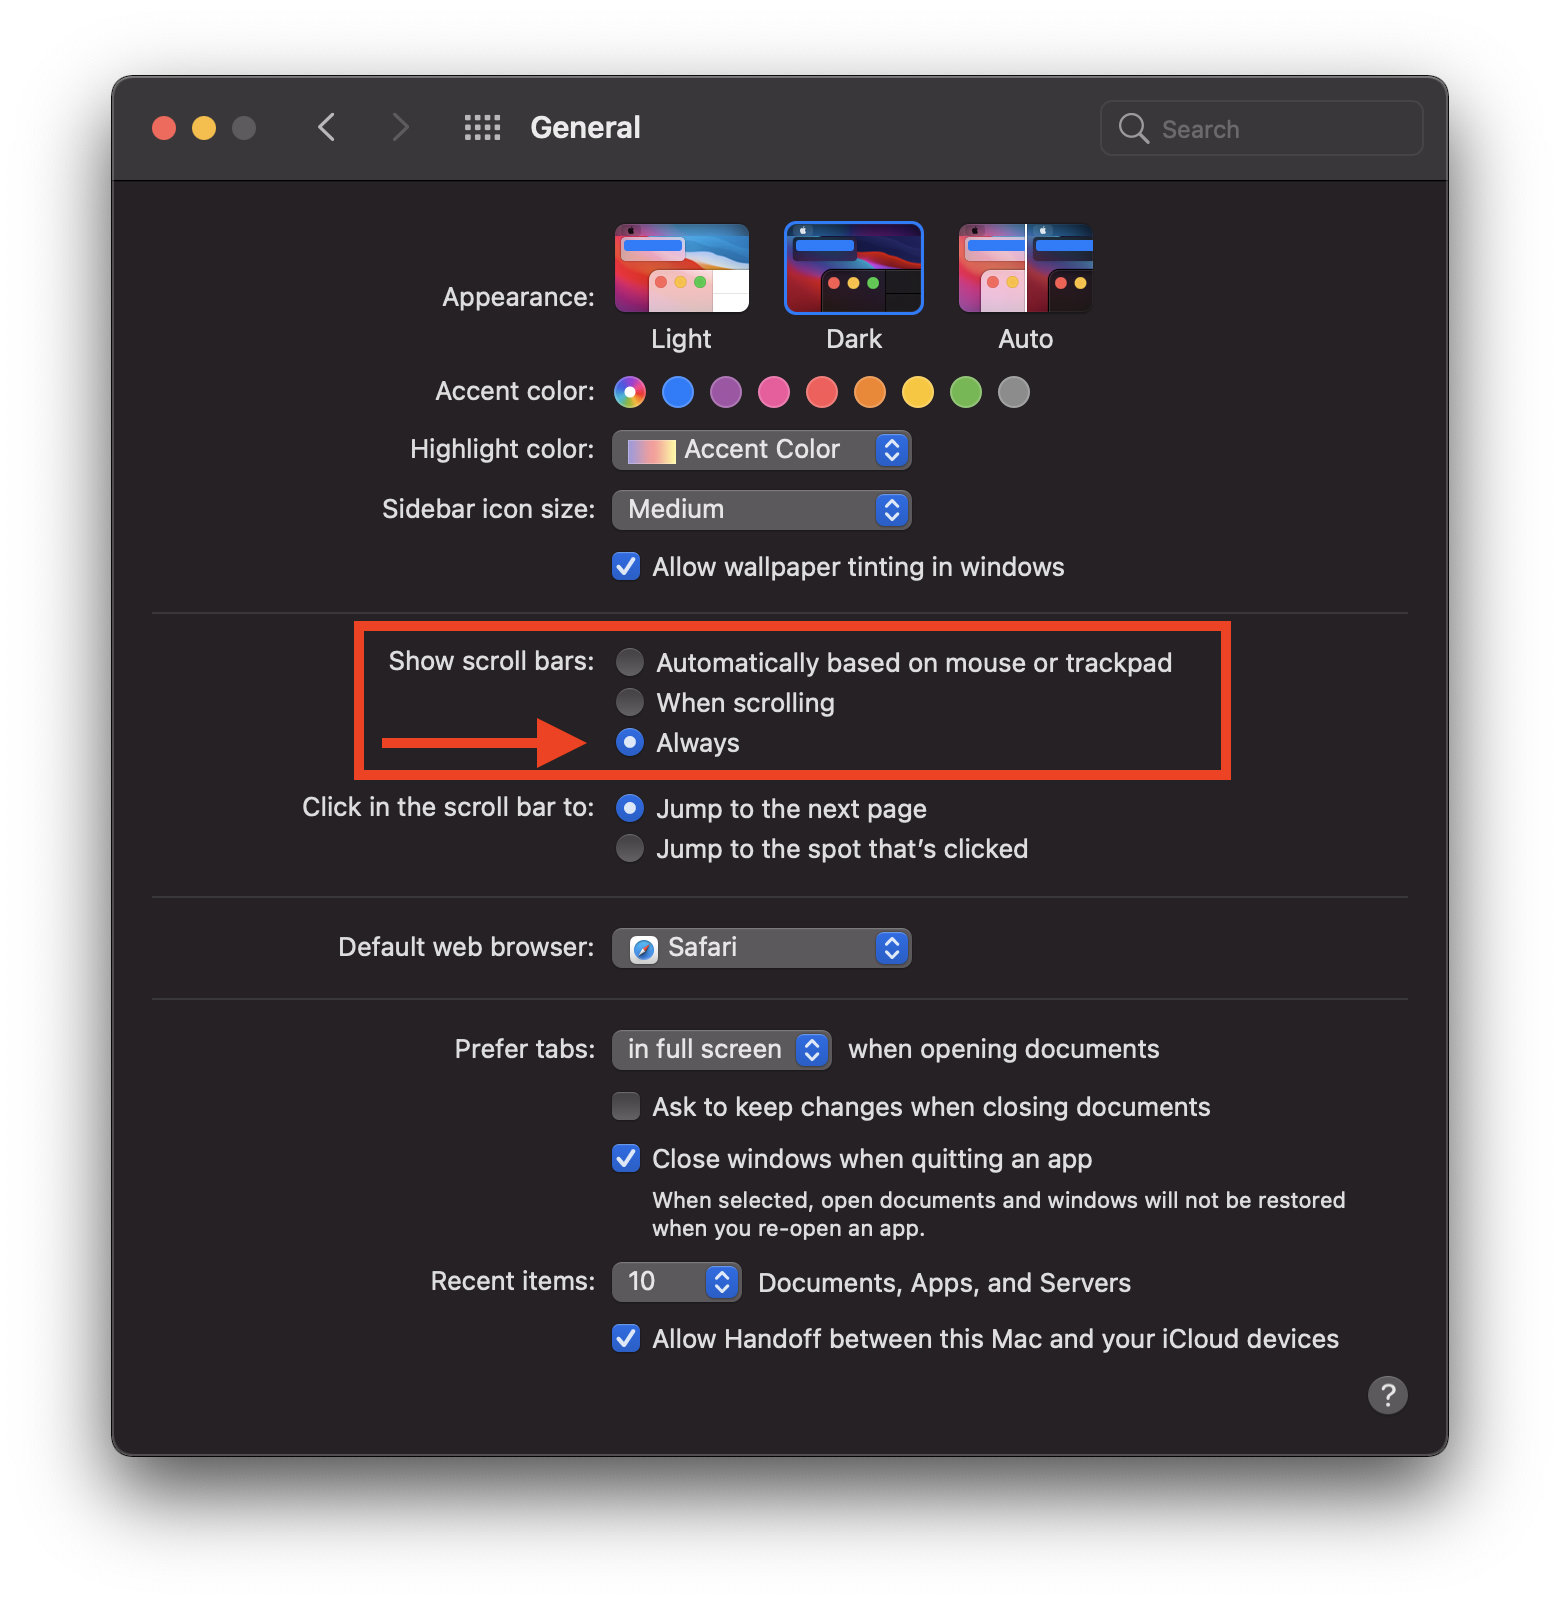 Mac operating system general preferences with show scroll bars options identified as described